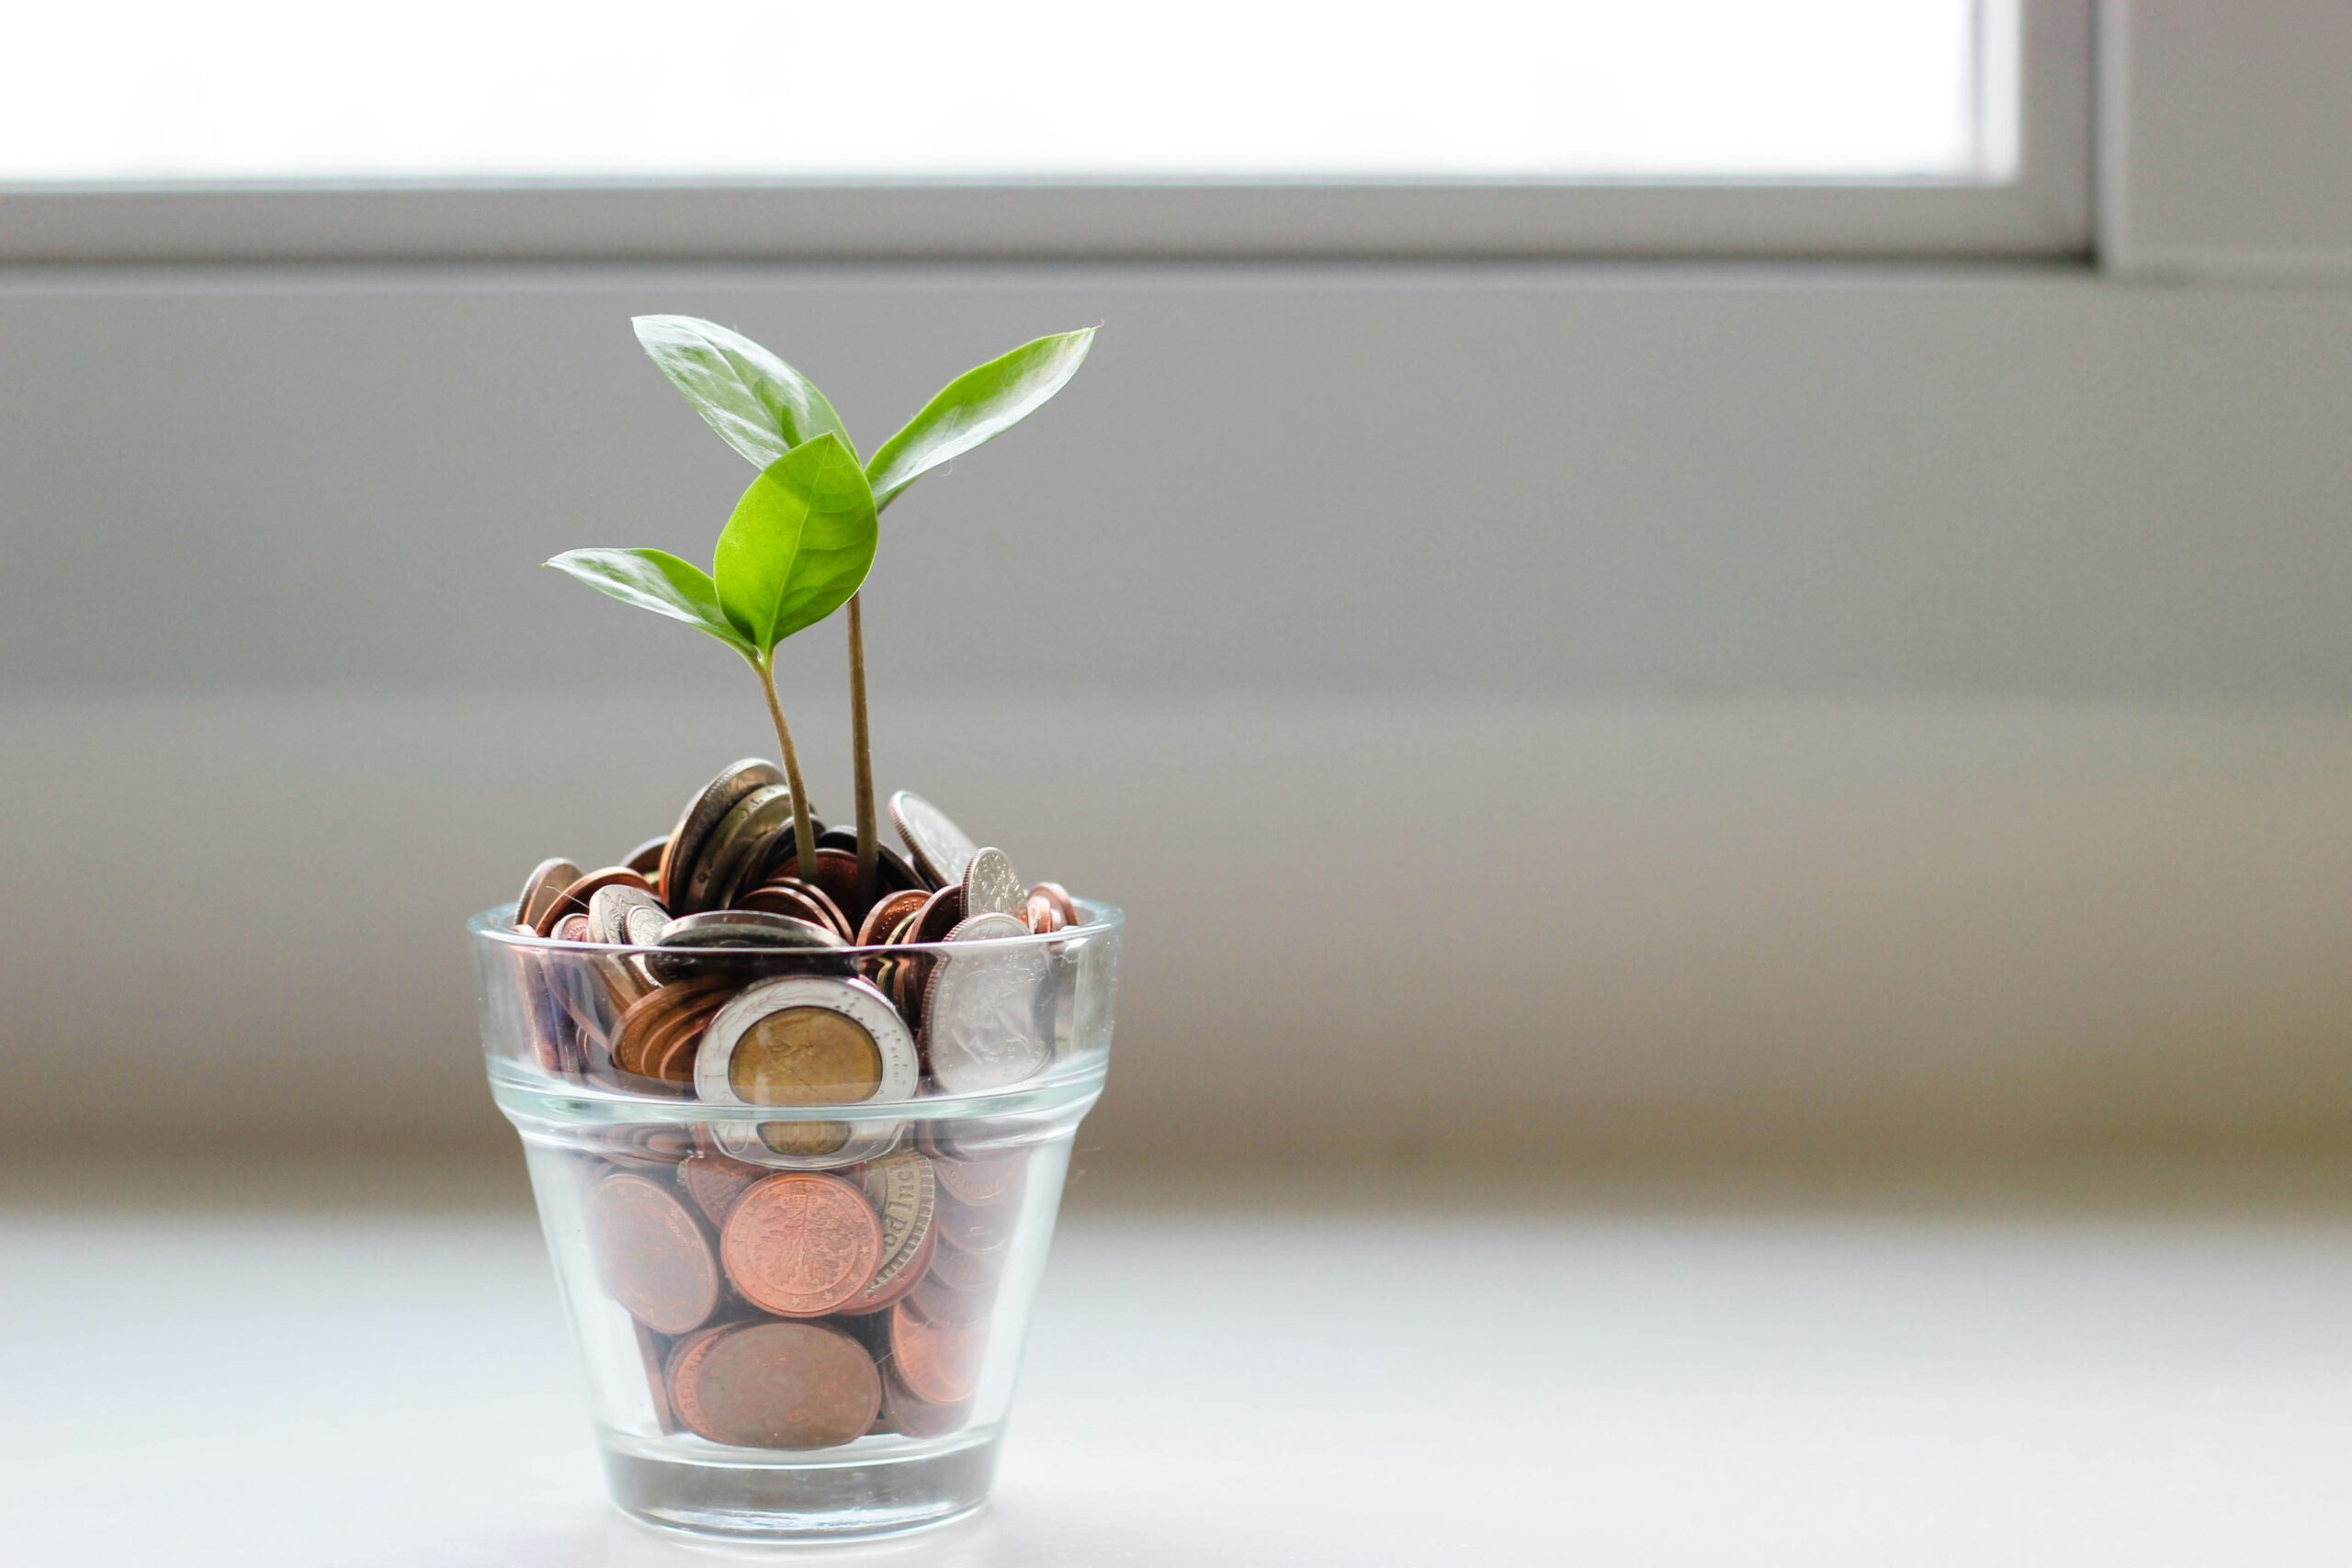 Small seedling growing in a glass of coins